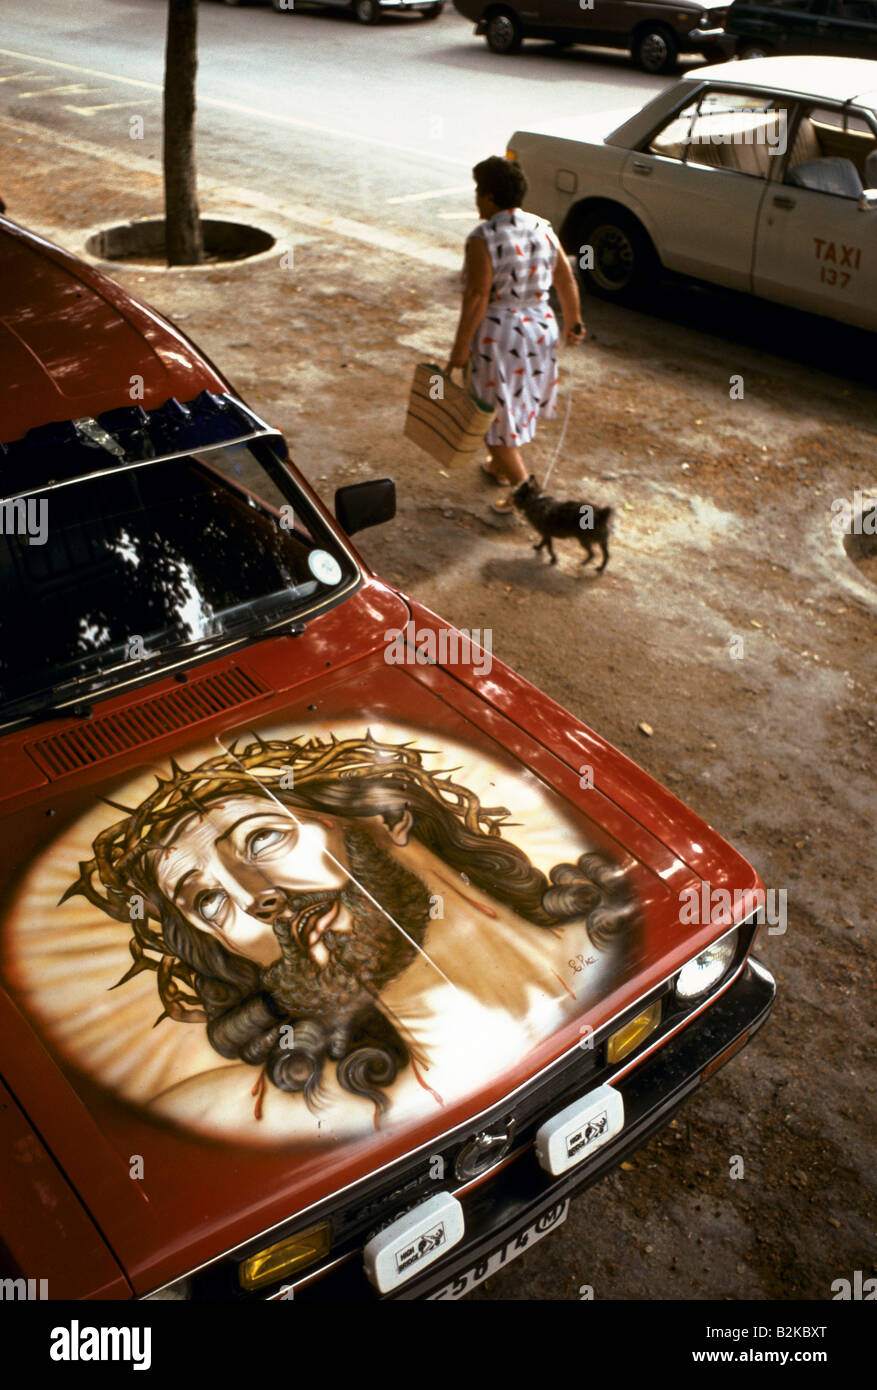 airbrushed image of jesus christ wearing crown of thorns painted on the bonnet of a car malta Stock Photo